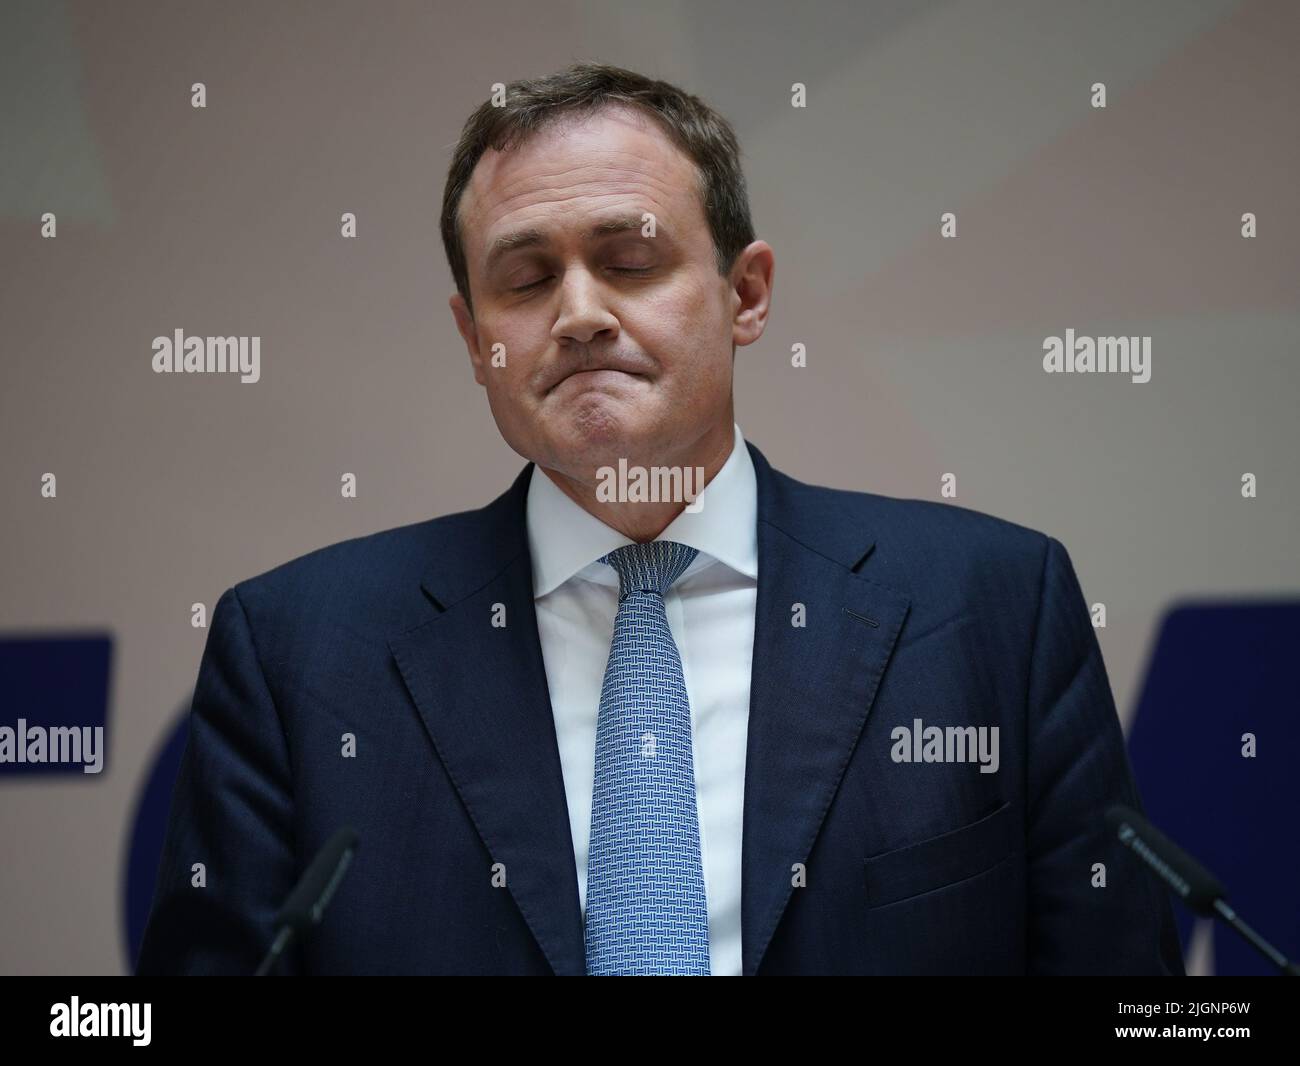 Tom Tugendhat speaking at the launch of his campaign to be Conservative Party leader and Prime Minister, at 4 Millbank, London. Picture date: Tuesday July 12, 2022. Stock Photo